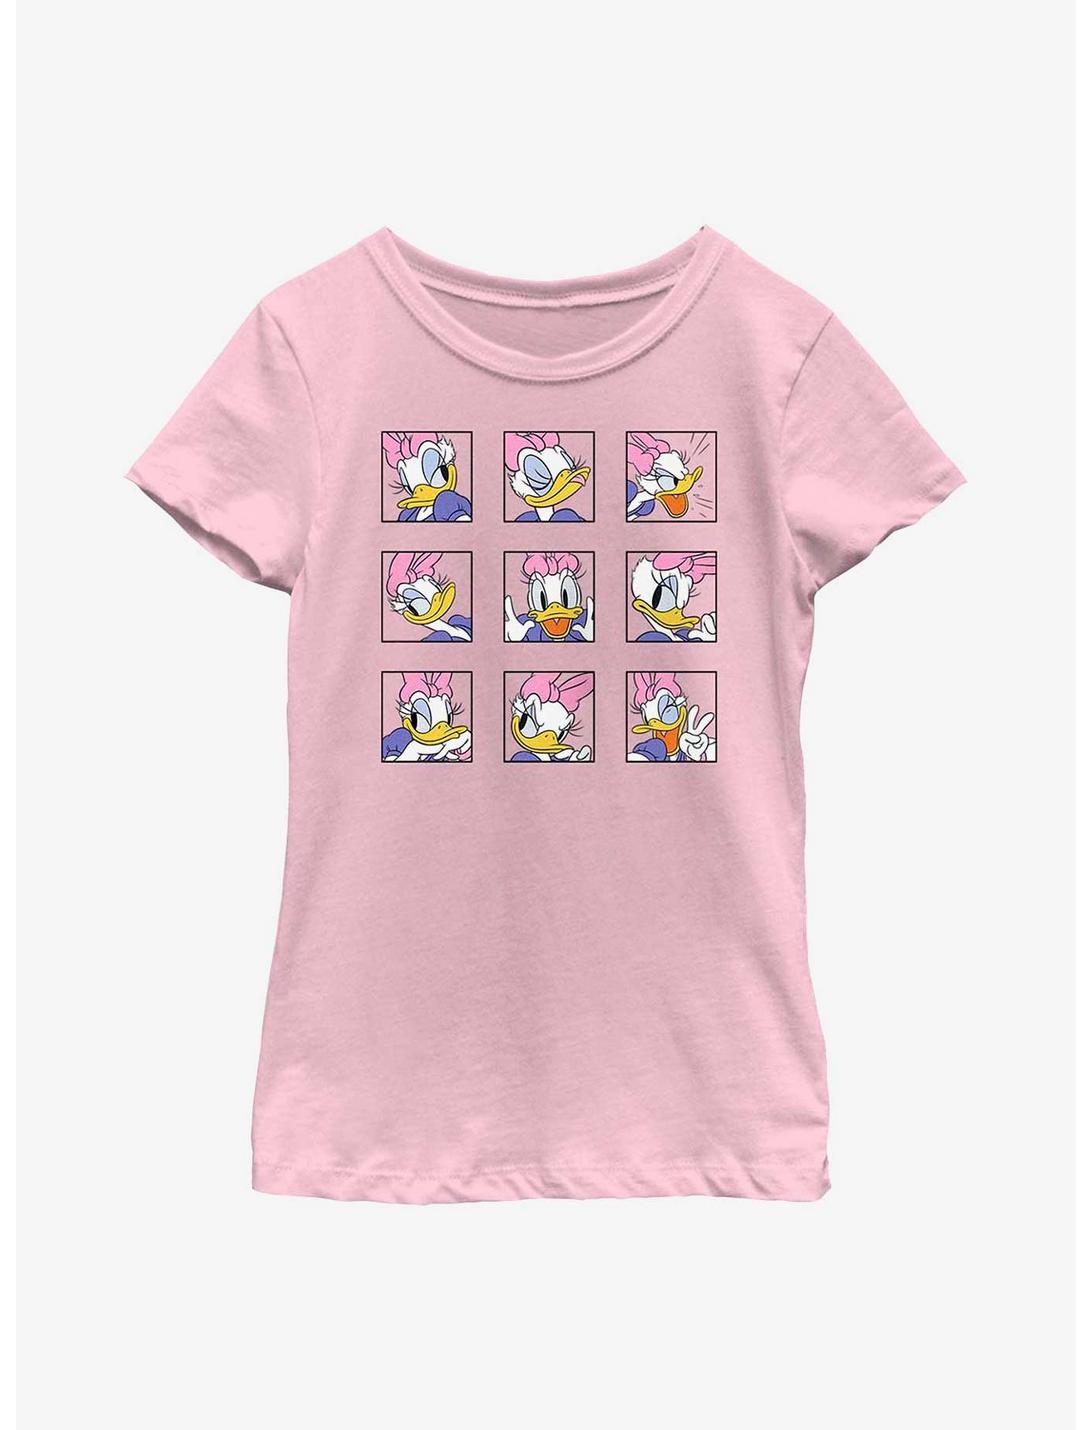 Disney Daisy Duck Grid Expressions Youth Girls T-Shirt, PINK, hi-res